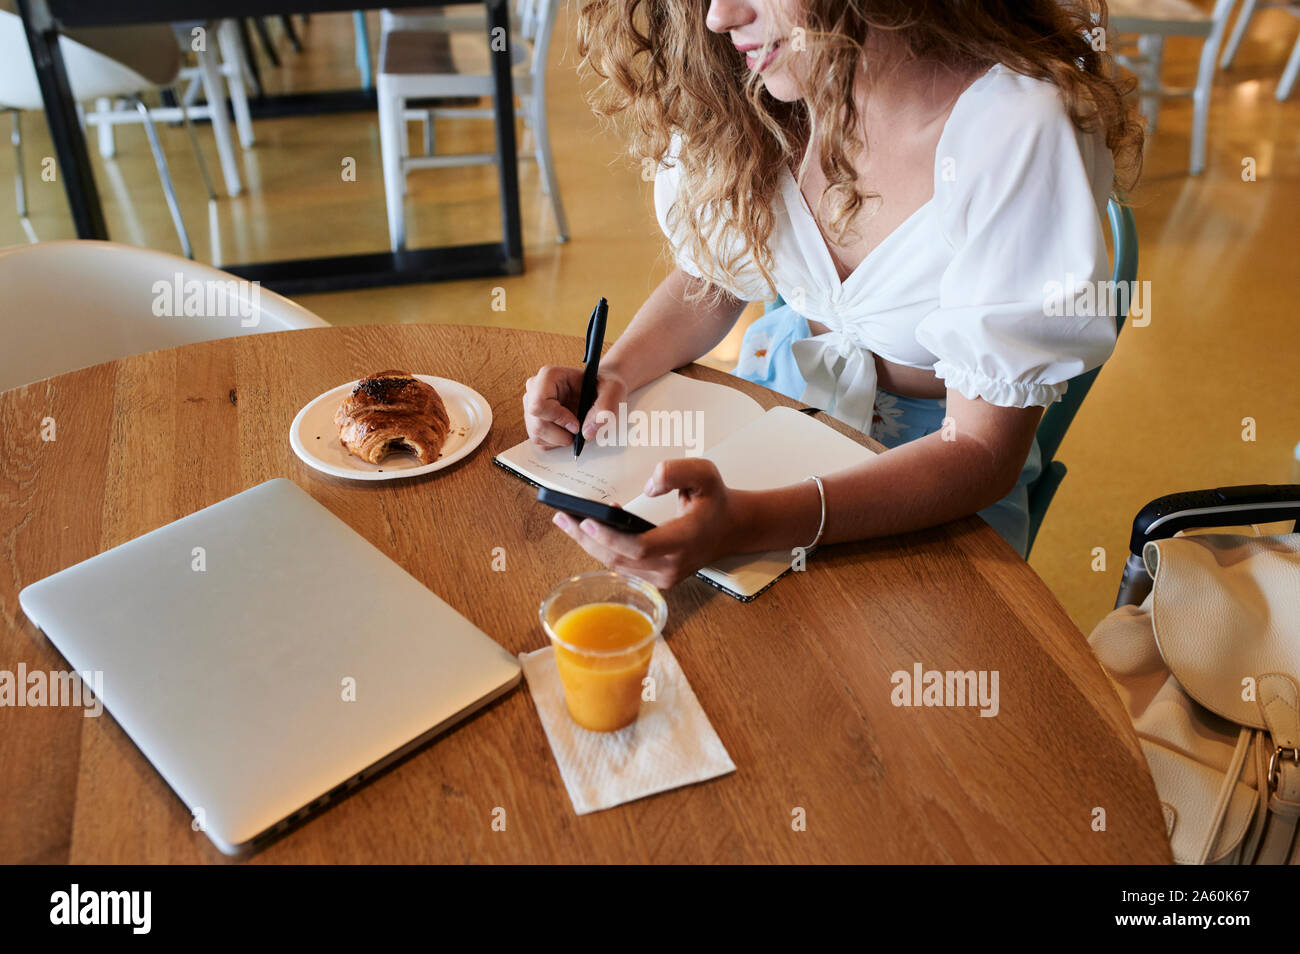 Young woman in a cafe using smartphone and taking notes while having breakfast Stock Photo